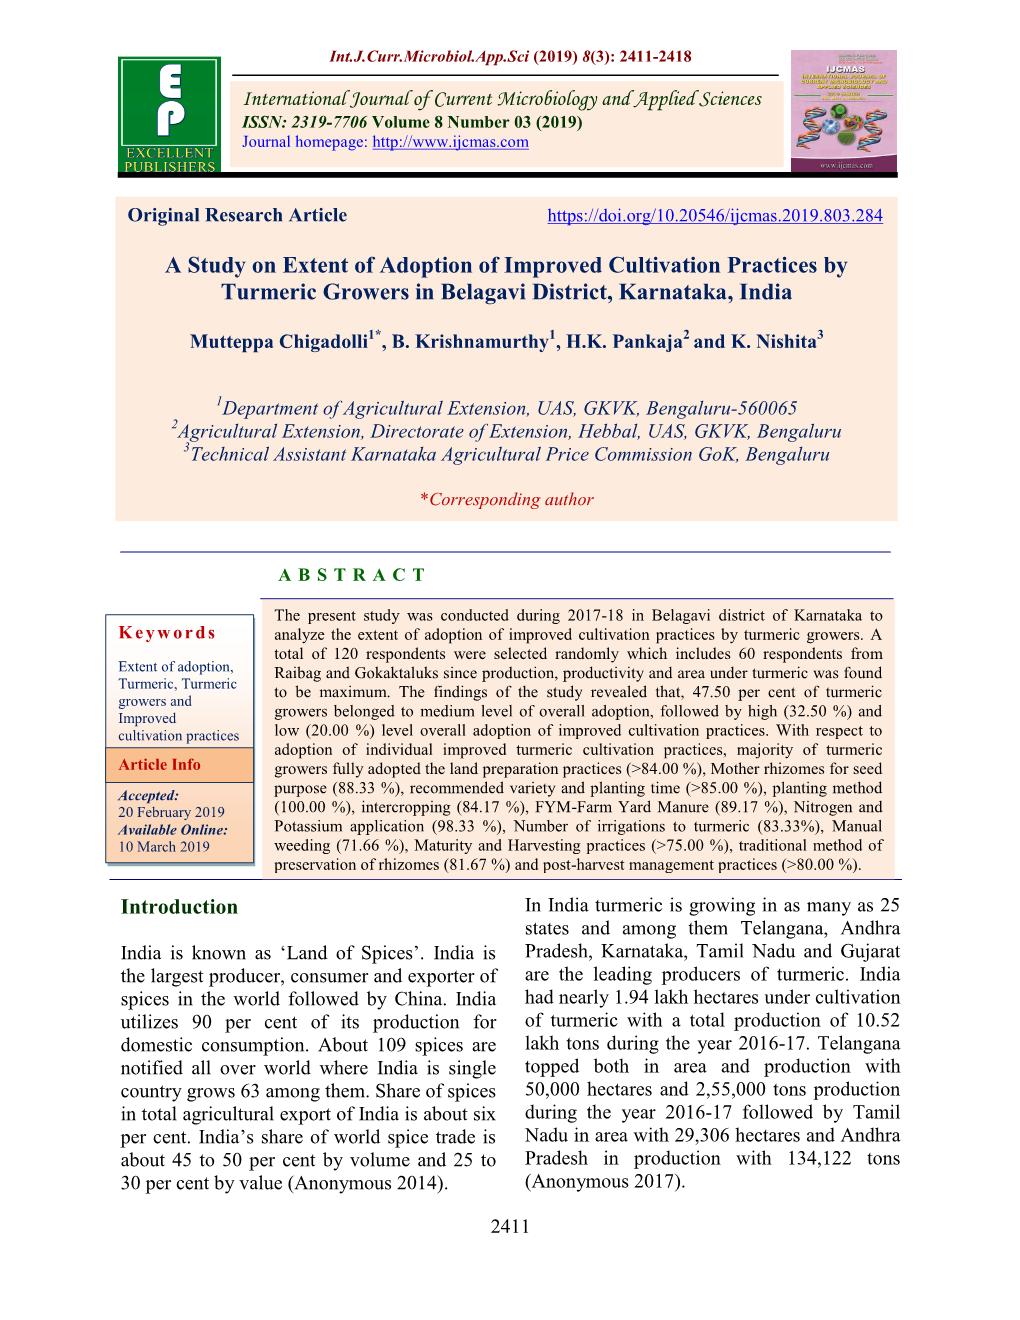 A Study on Extent of Adoption of Improved Cultivation Practices by Turmeric Growers in Belagavi District, Karnataka, India